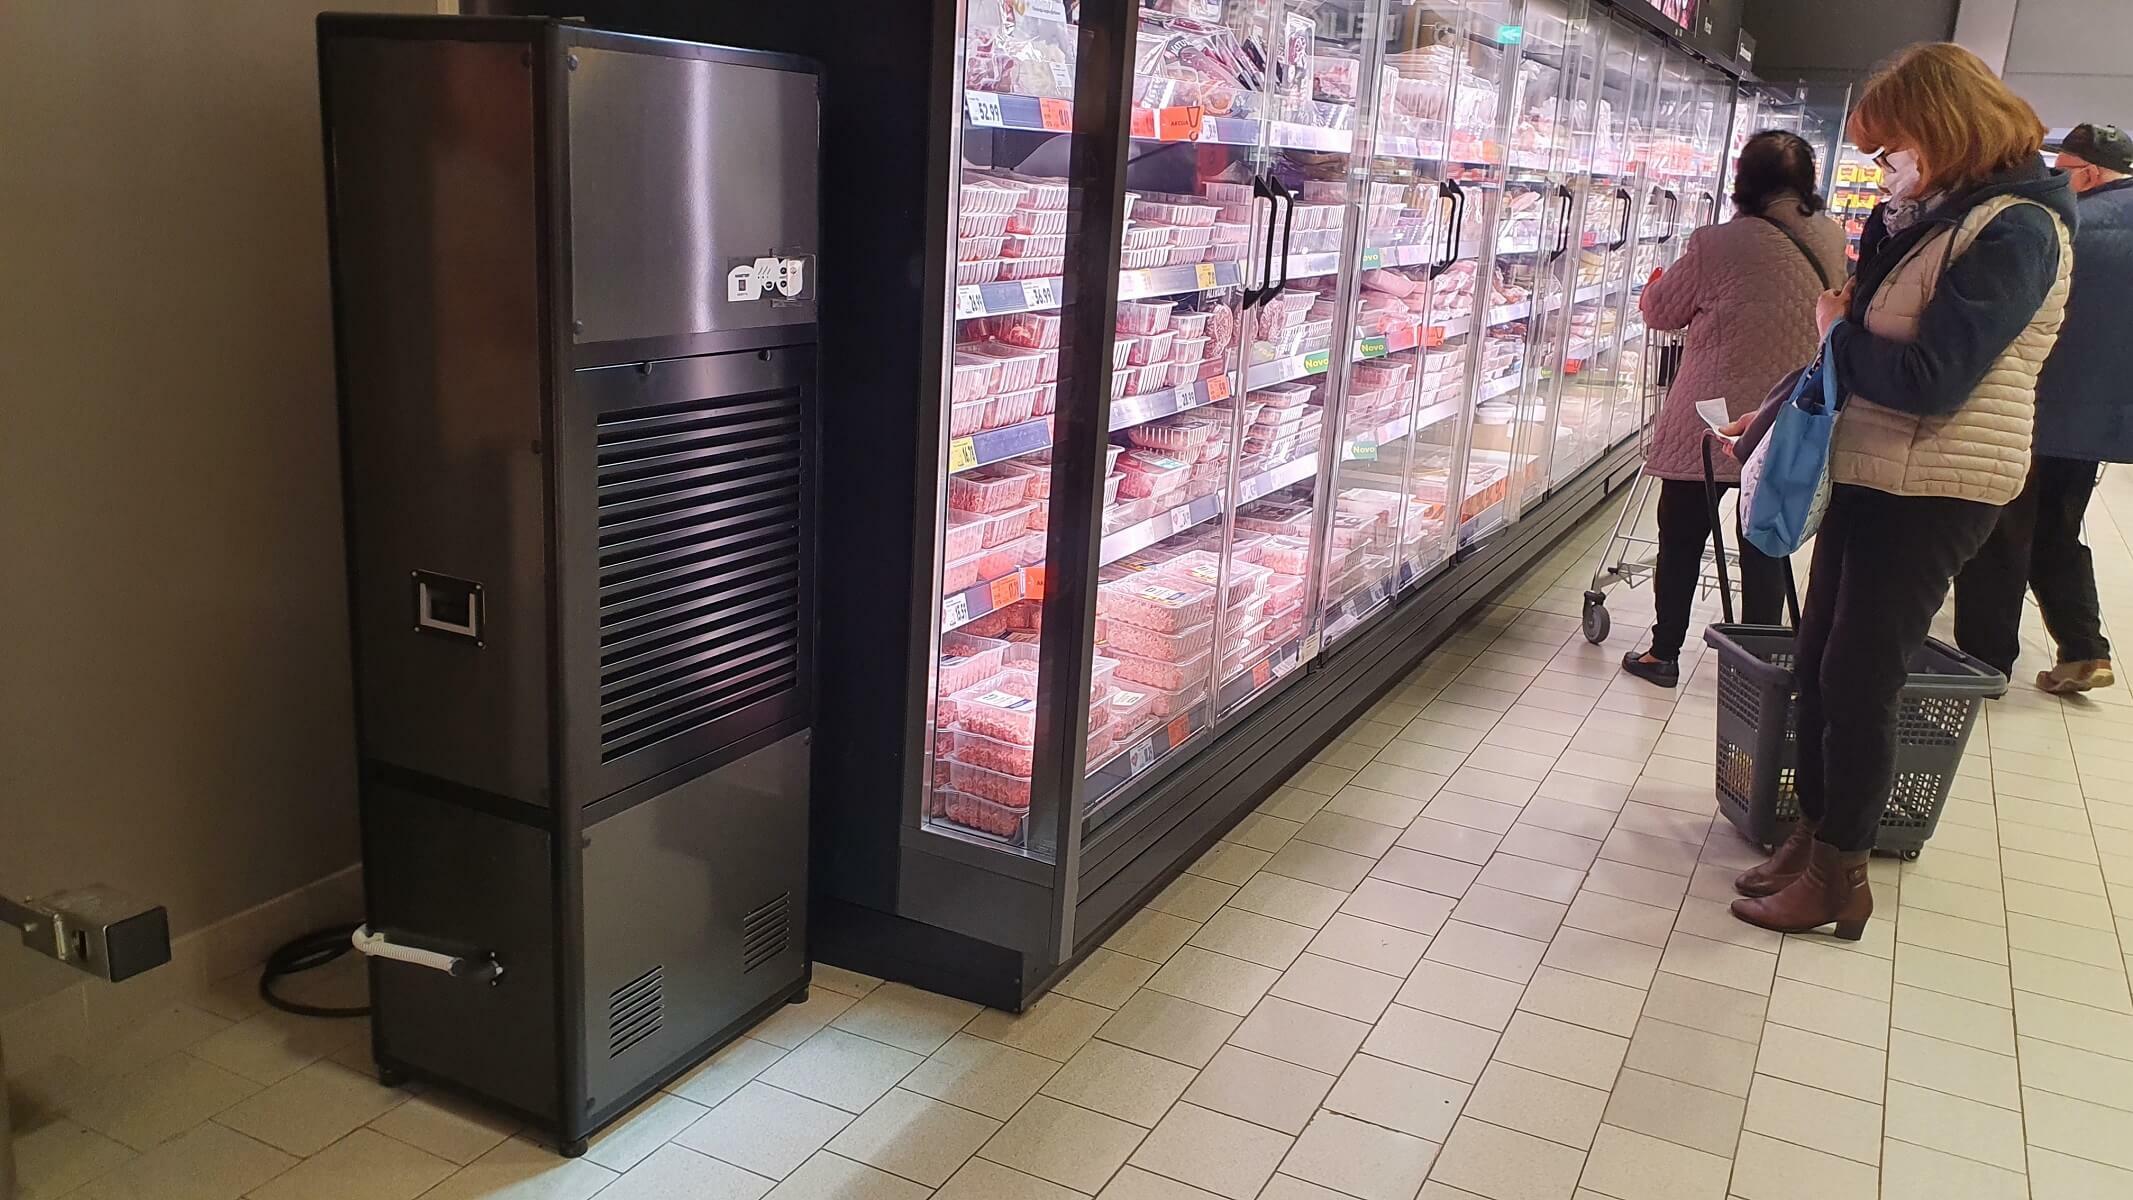 Photograph of freezer unit and Master dehumidifier unit in a supermarket food store - Infographic image